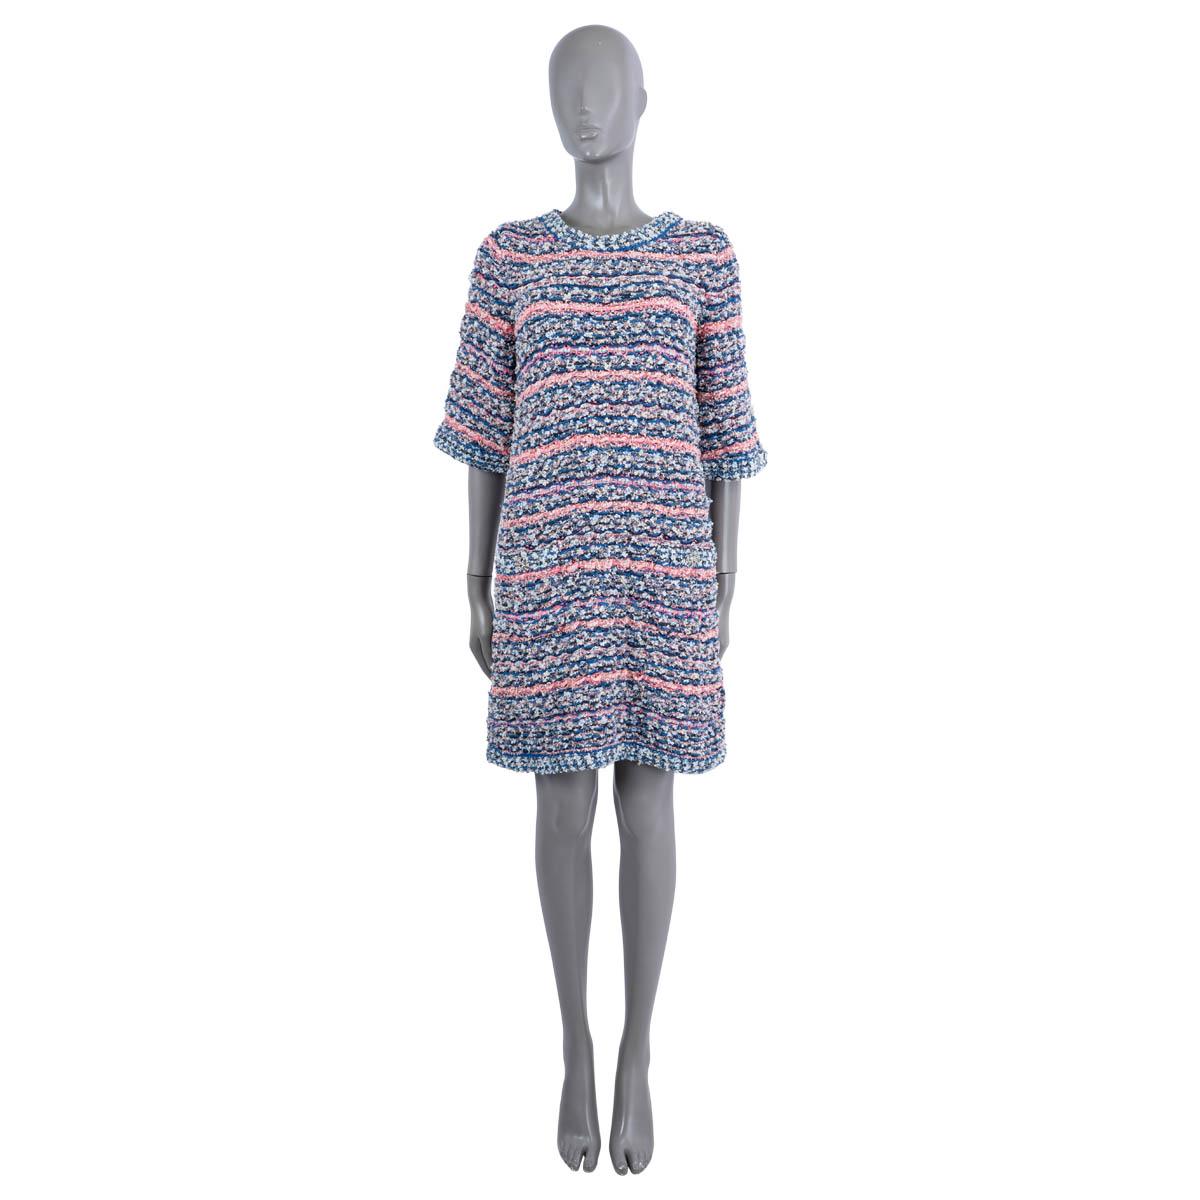 100% authentic Chanel striped knit dress in blue, pink and white polyamide (41%), viscose (23%), polyester, (16%), cotton (14%) and silk (6%). Features short sleeves and two buttoned pockets on the front with jeweled Gripox buttons. Unlined. Has